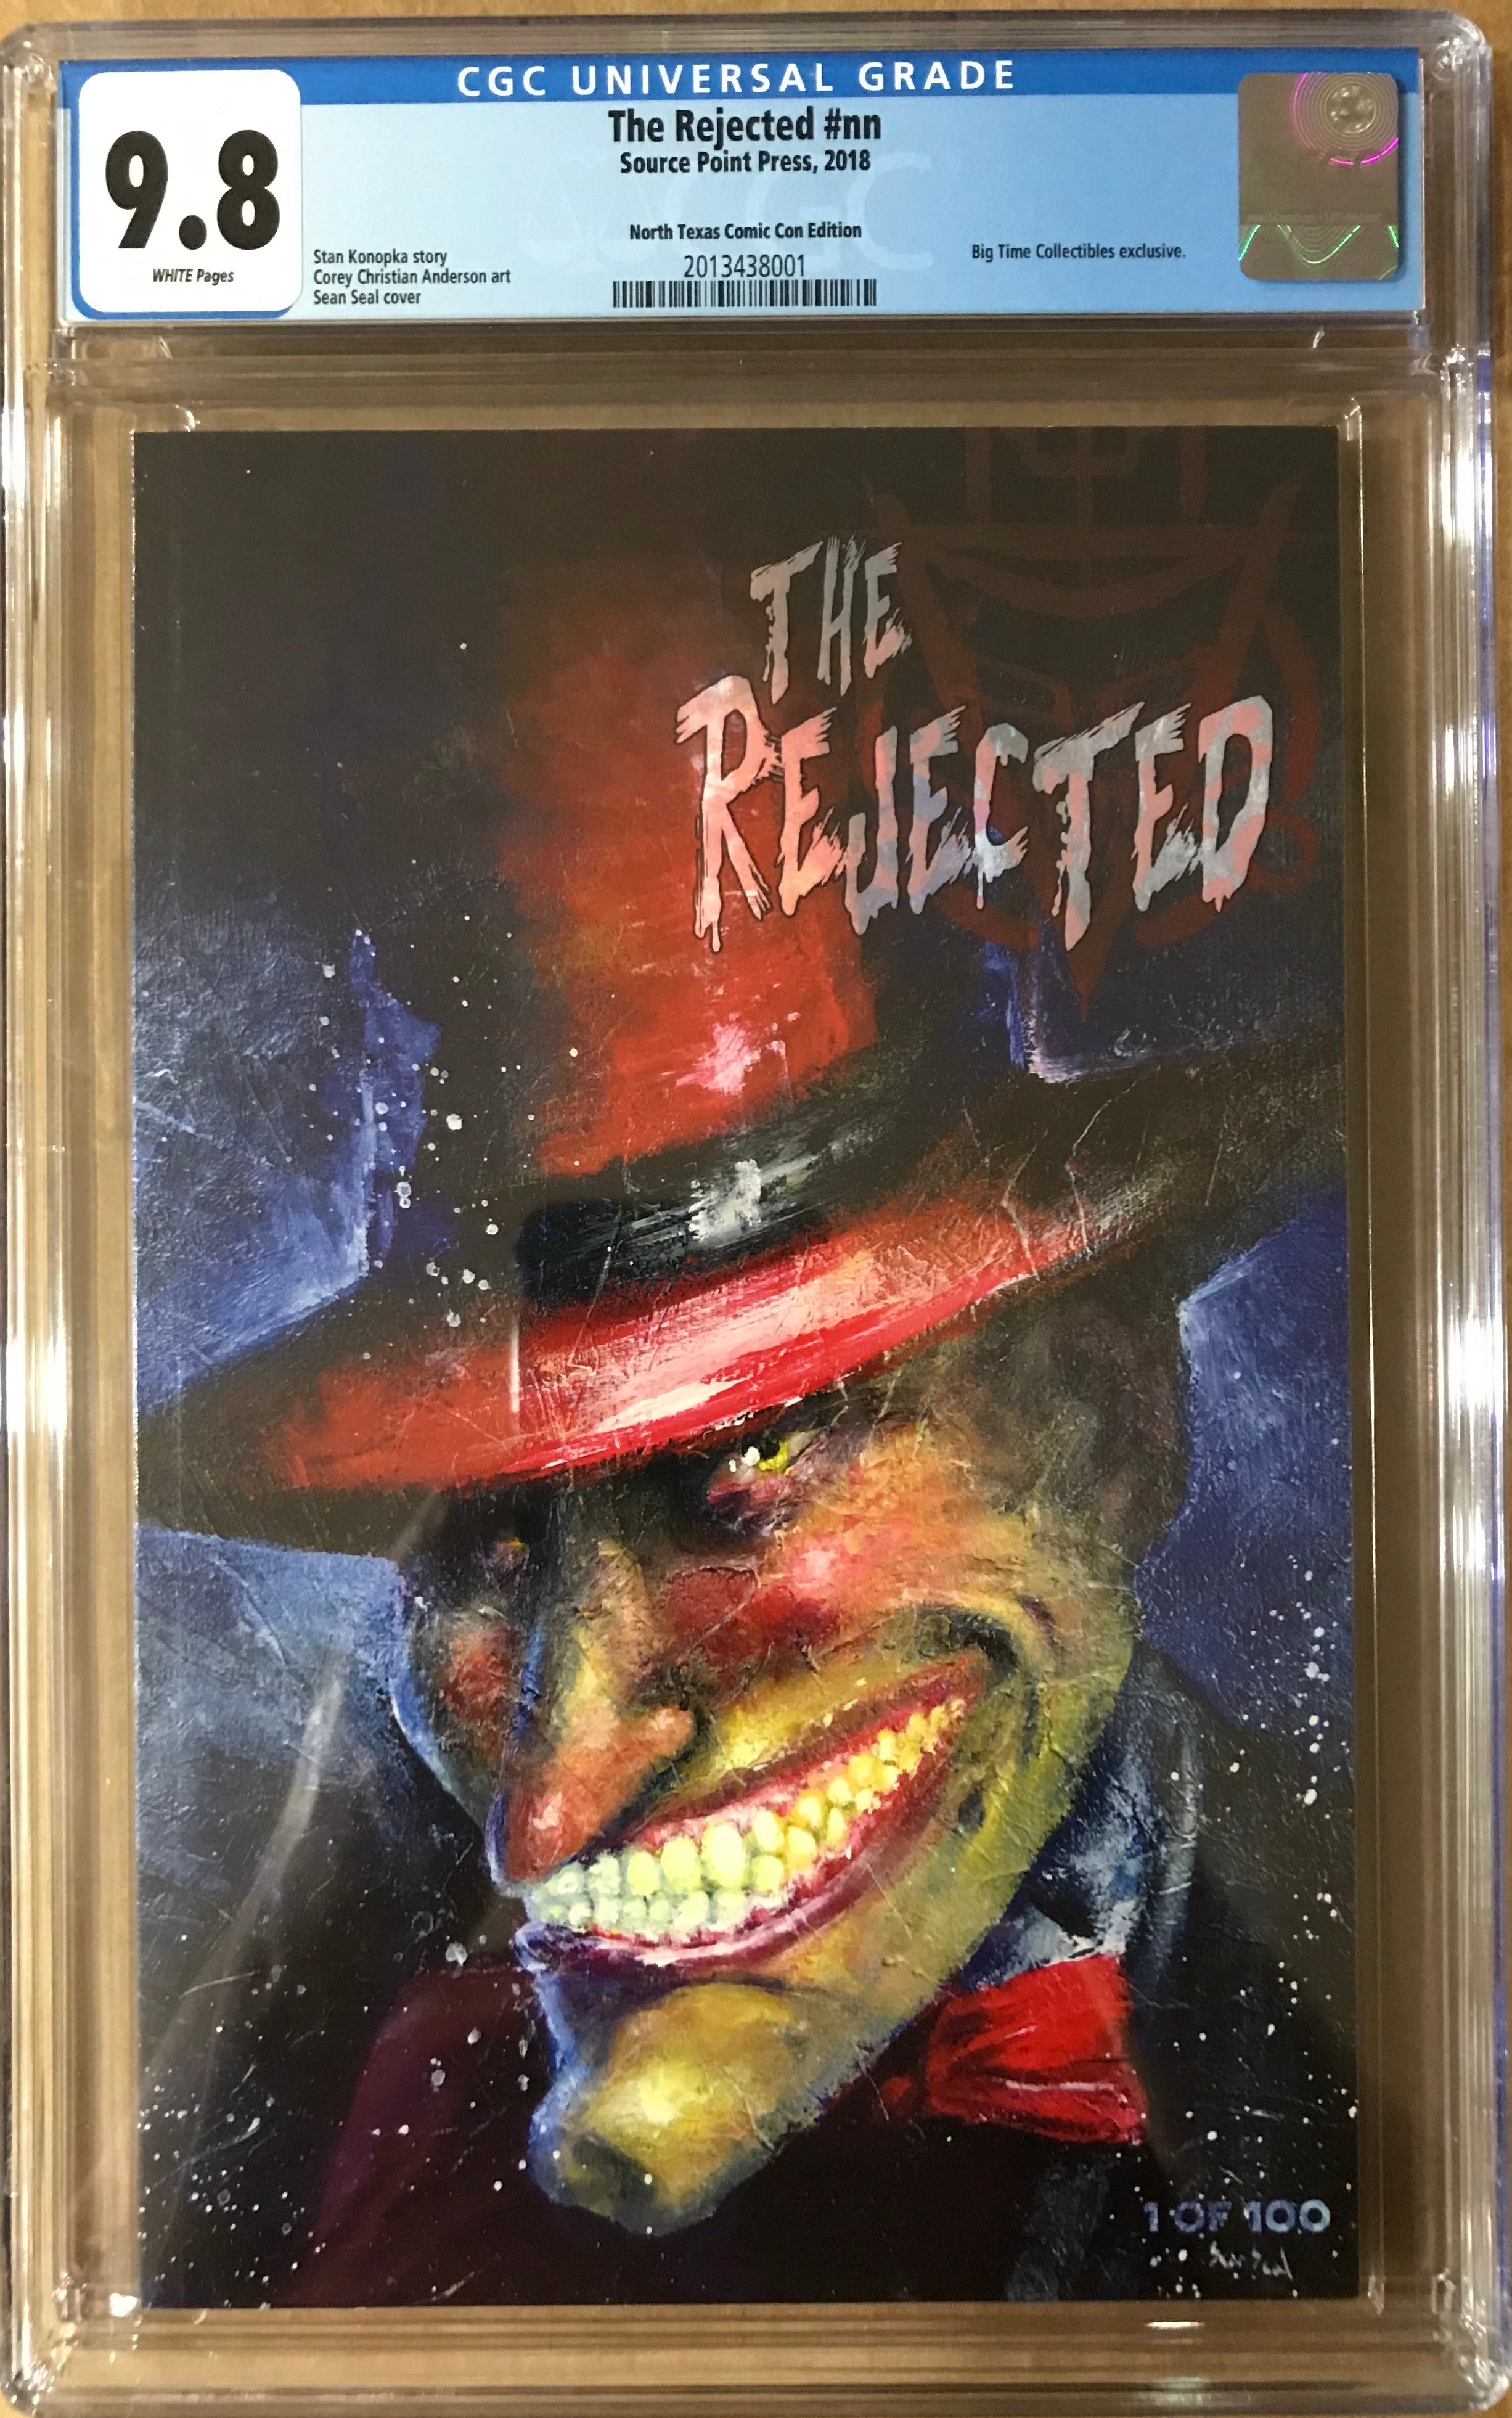 THE REJECTED #1 BTC & NTC COMIC BOOK SHOW 2019 EXCLUSIVE CGC 9.8